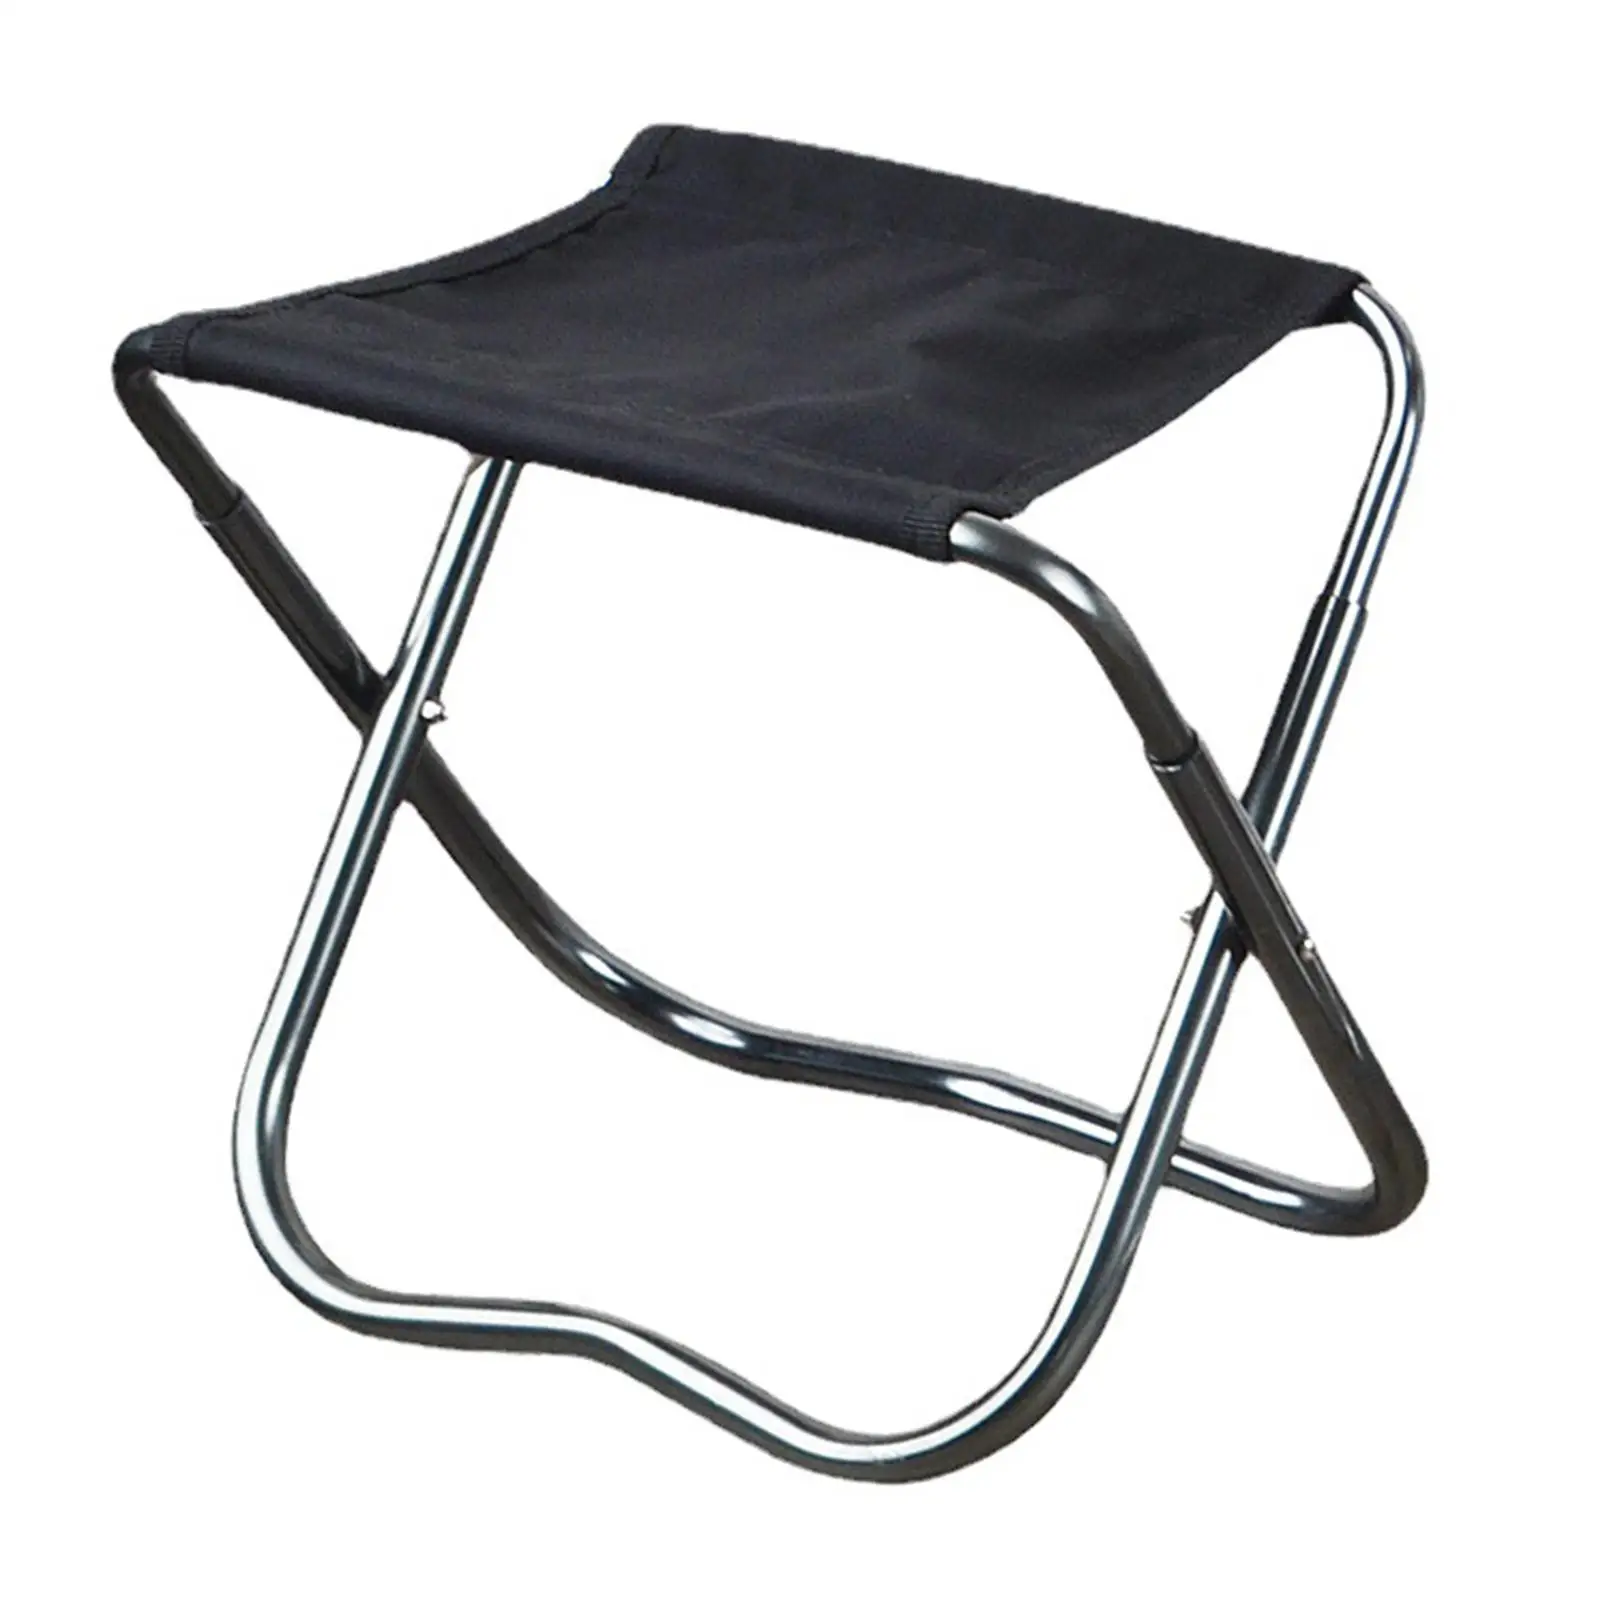 Camping Chair Easy to Carry Folding Stool Collapsible Comfortable Outdoor Fishing Seat for Hiking Camping Picnic Lawn